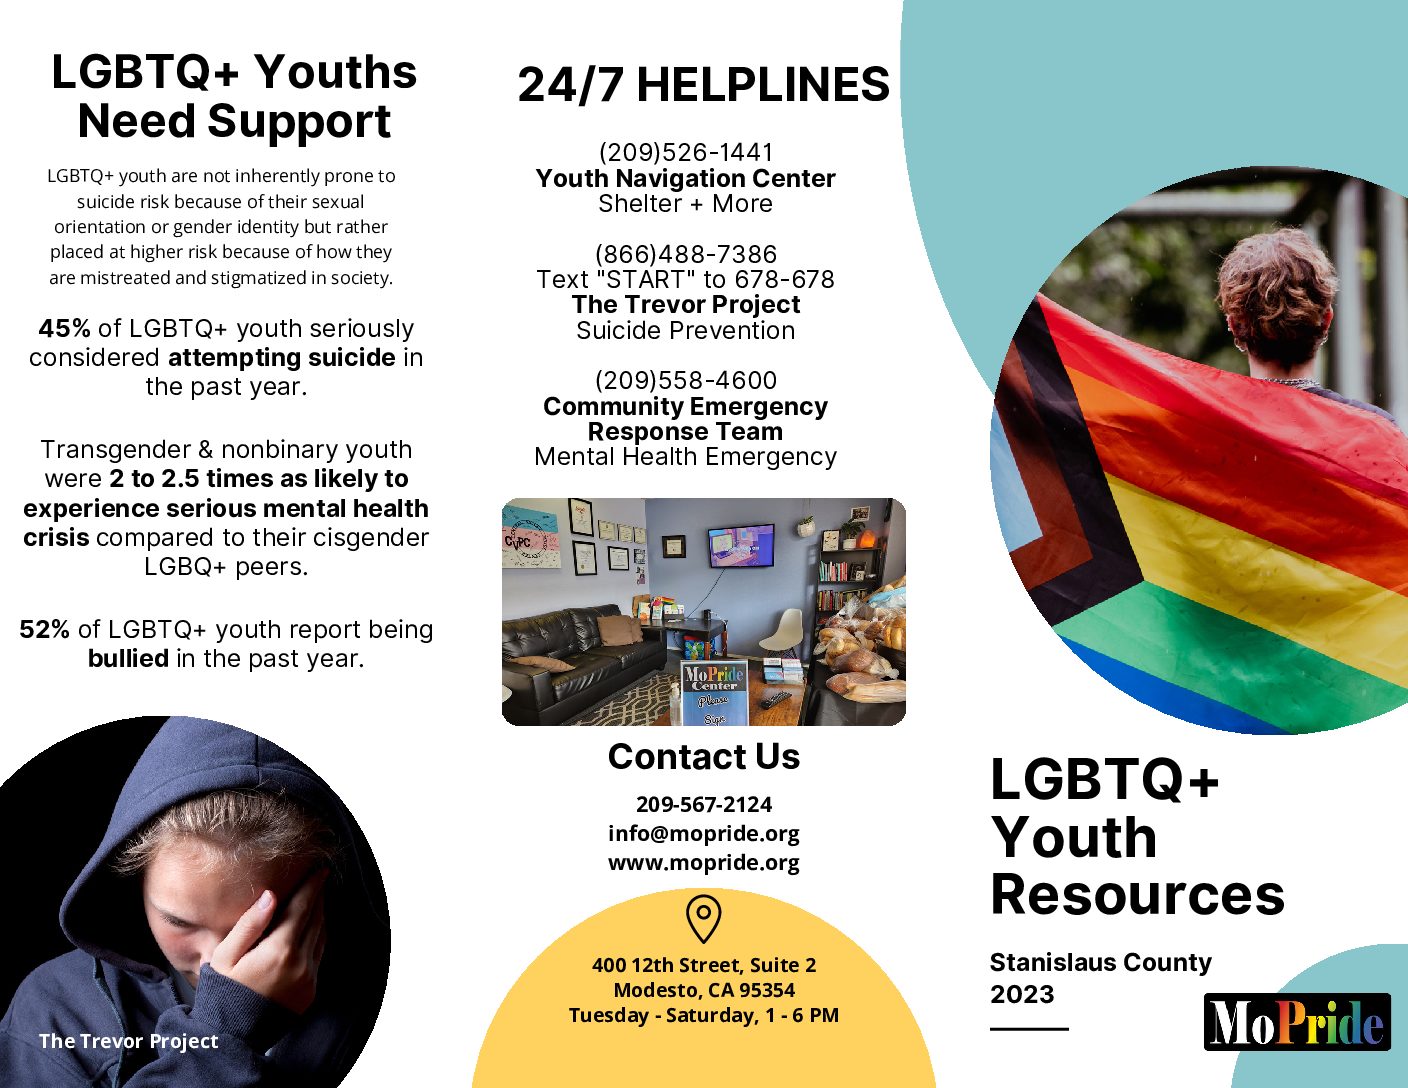 LGBTQ+ youth resources for Stanislaus County 2023